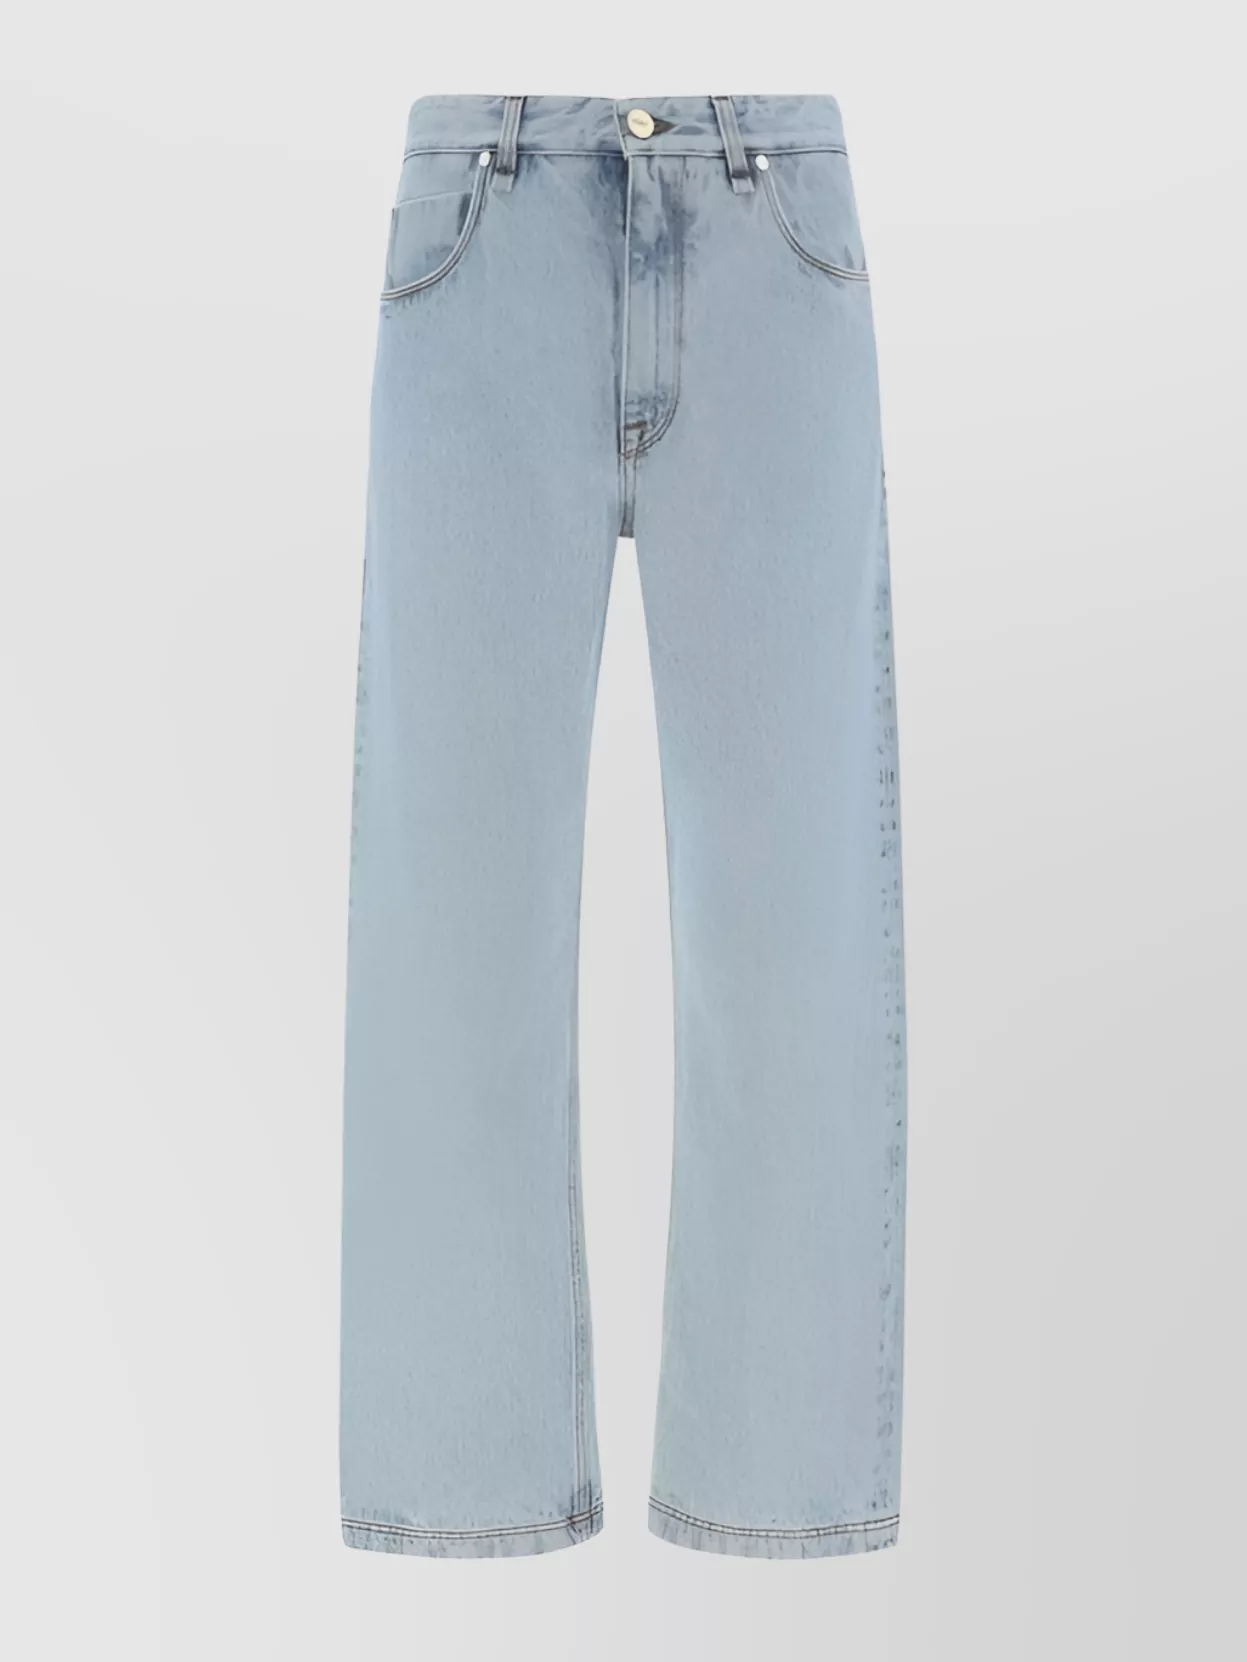 Fendi Straight Cotton Jeans With Contrast Pocket Design In Blue